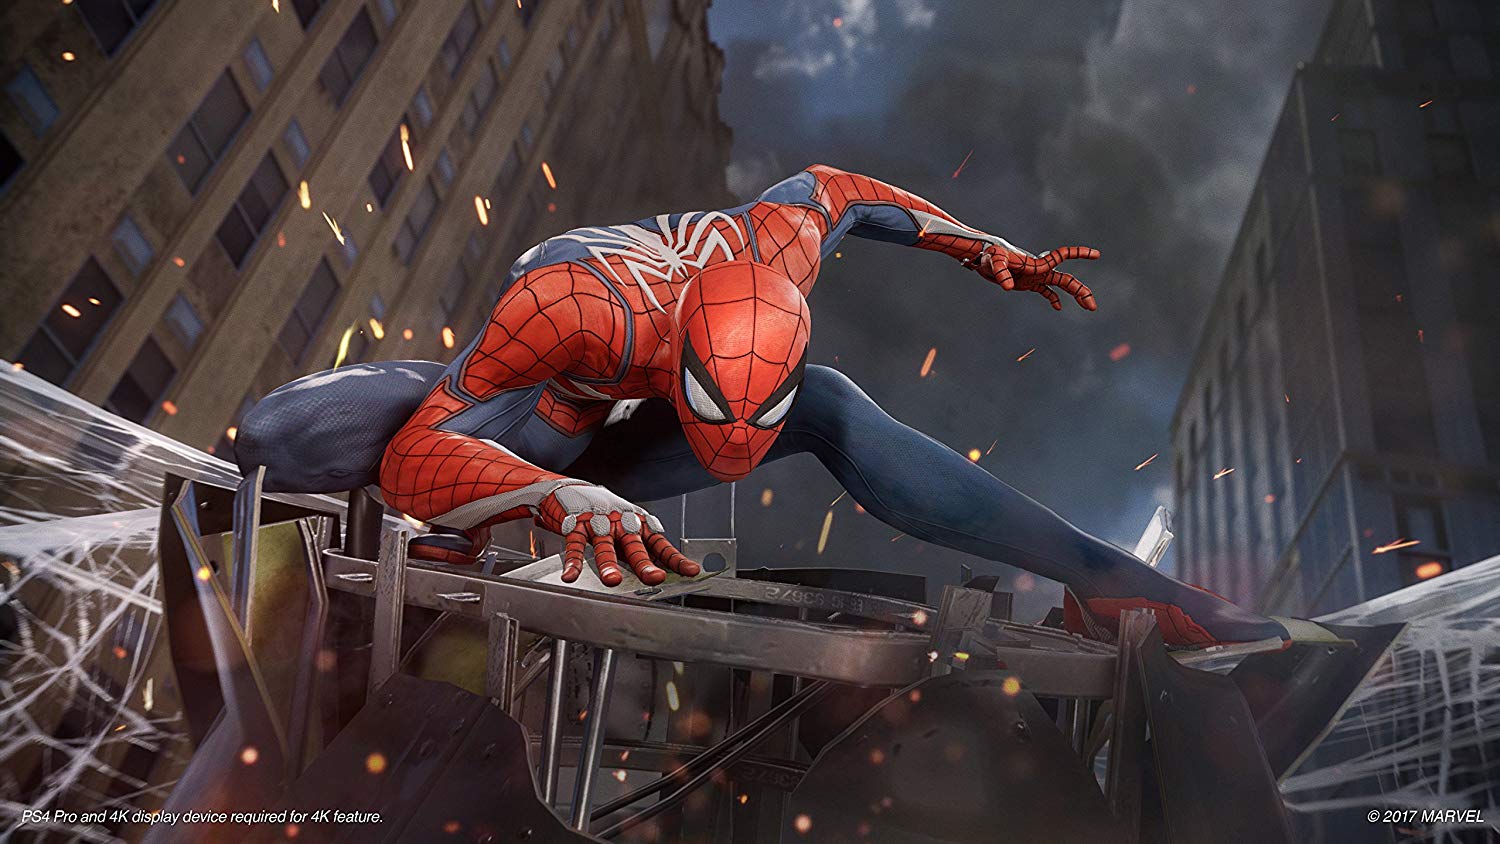 Spider-Man PC Footage Leaked Prior to Official Release - KeenGamer